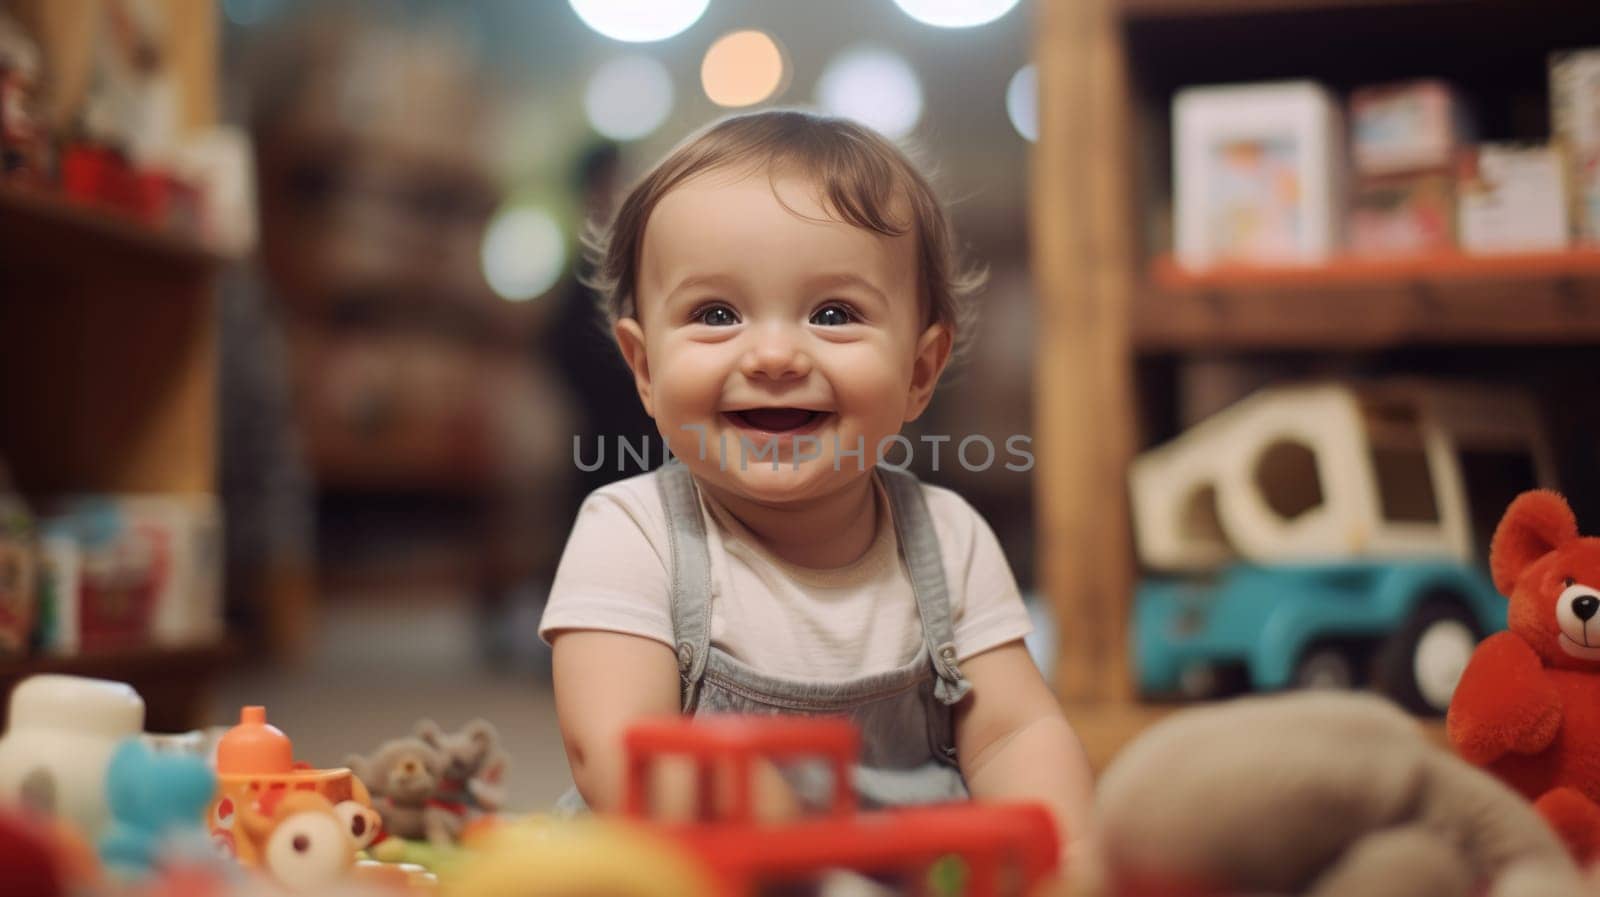 baby toddler playing colorful toys at home or nursery. Newborn baby smiling at camera at play center